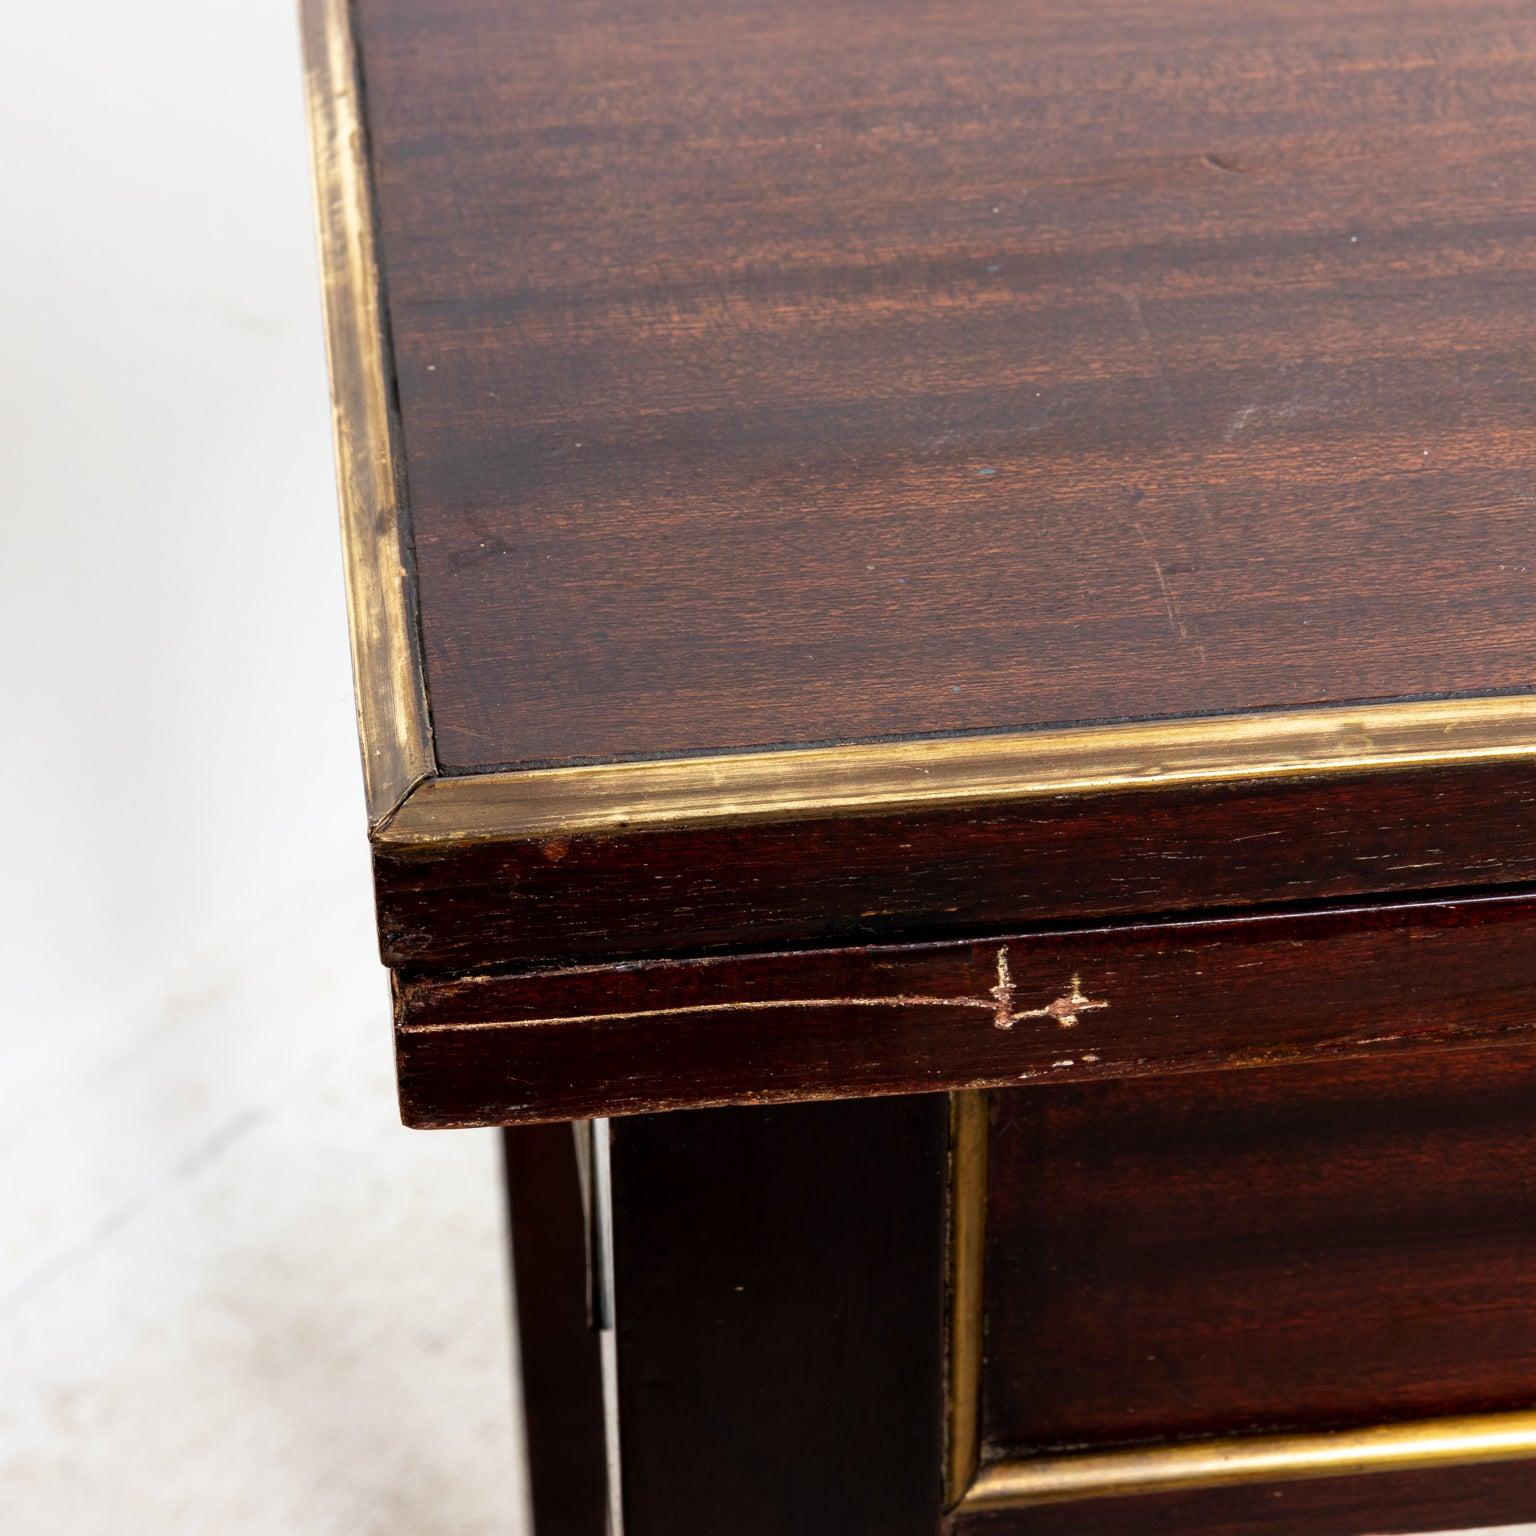 Mahogany table with brass quarter round branding on sides and brass carved banding inlay on top on four tapered legs capped with brass feet. Table opens to 64